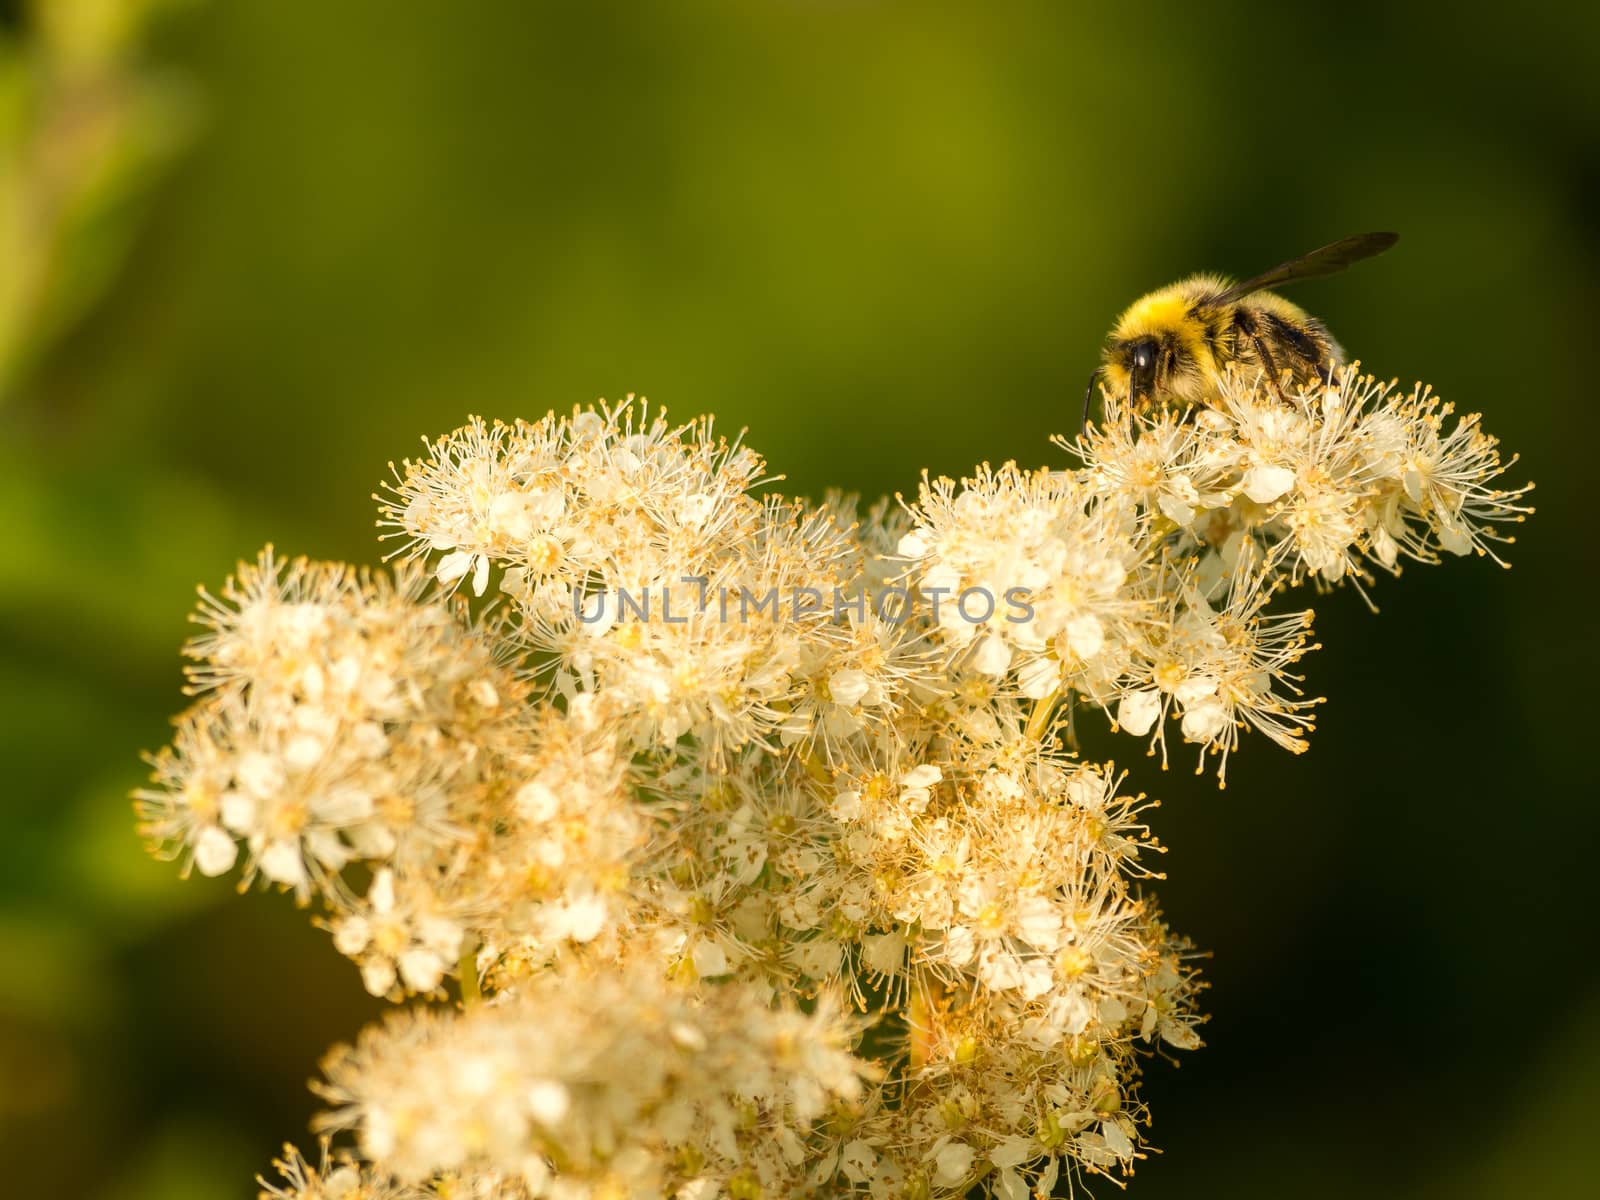 Sneaking into the shot from behind this beautiful powdery white flower. This wasp was enjoying the late evening sunlight